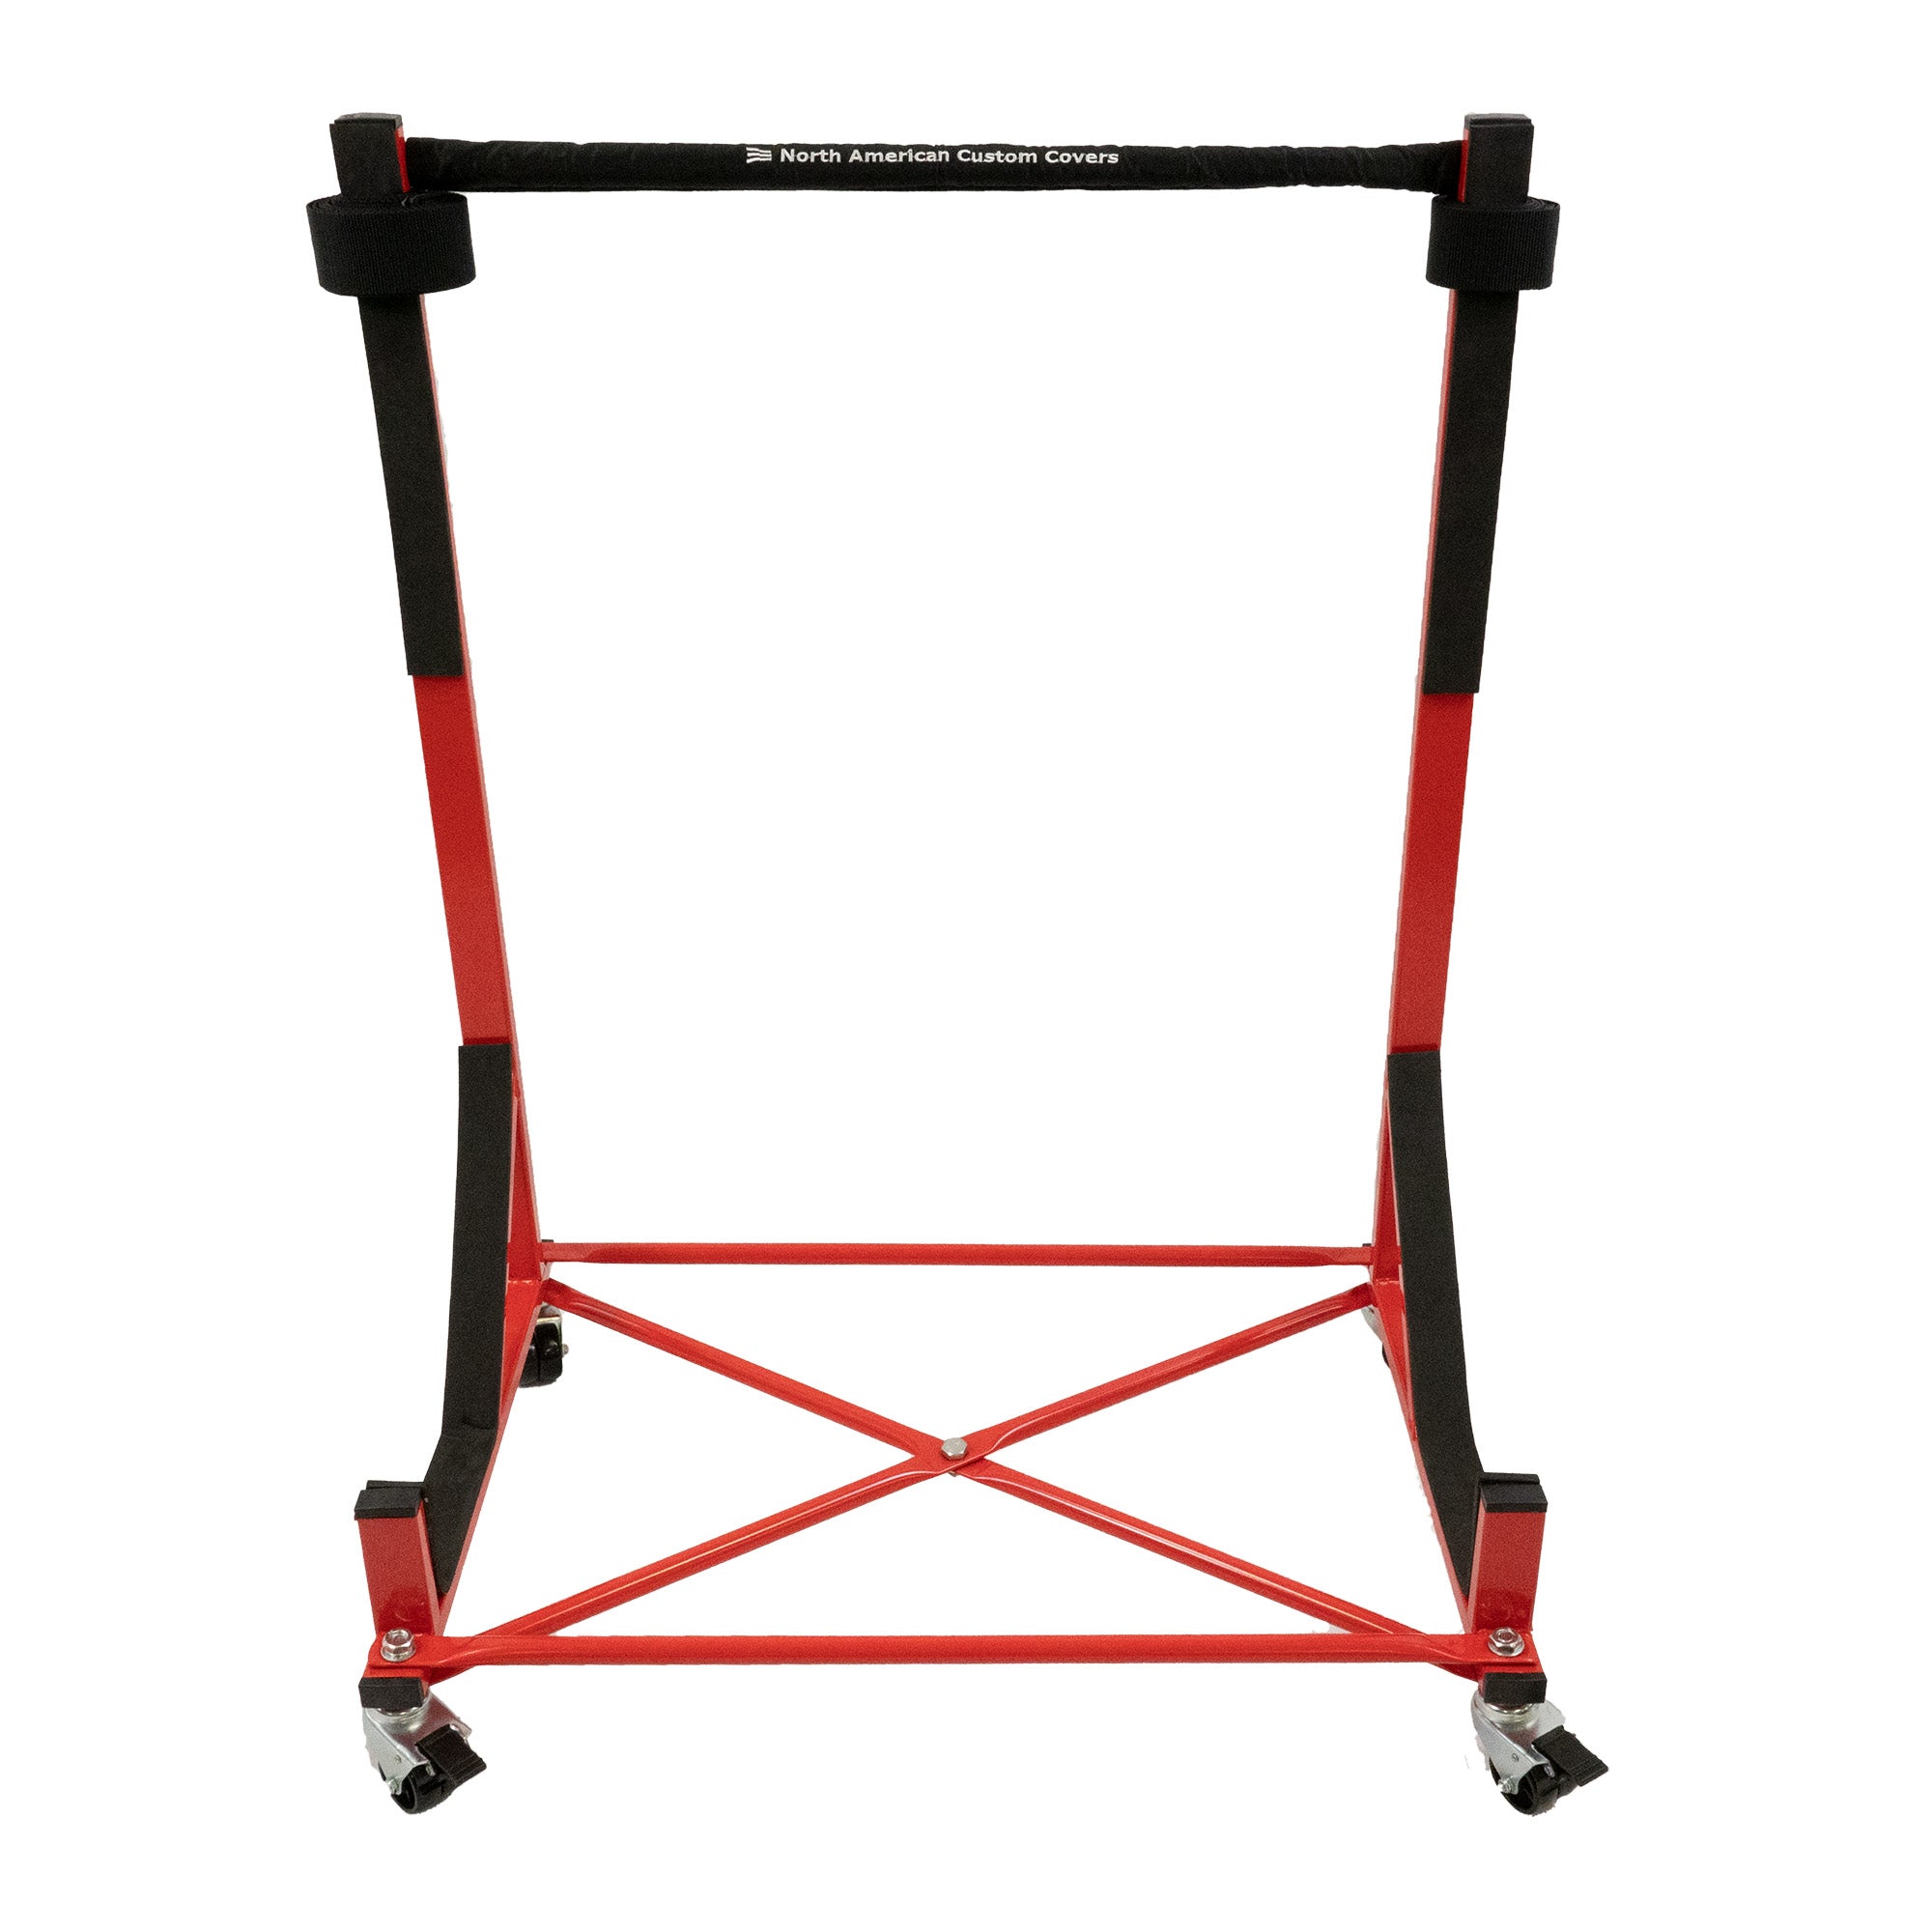 Mazda MX-5 Miata Heavy-duty Hardtop Stand Trolley Cart Rack (Red) with Securing Harness and Hard Top Dust Cover (050R)